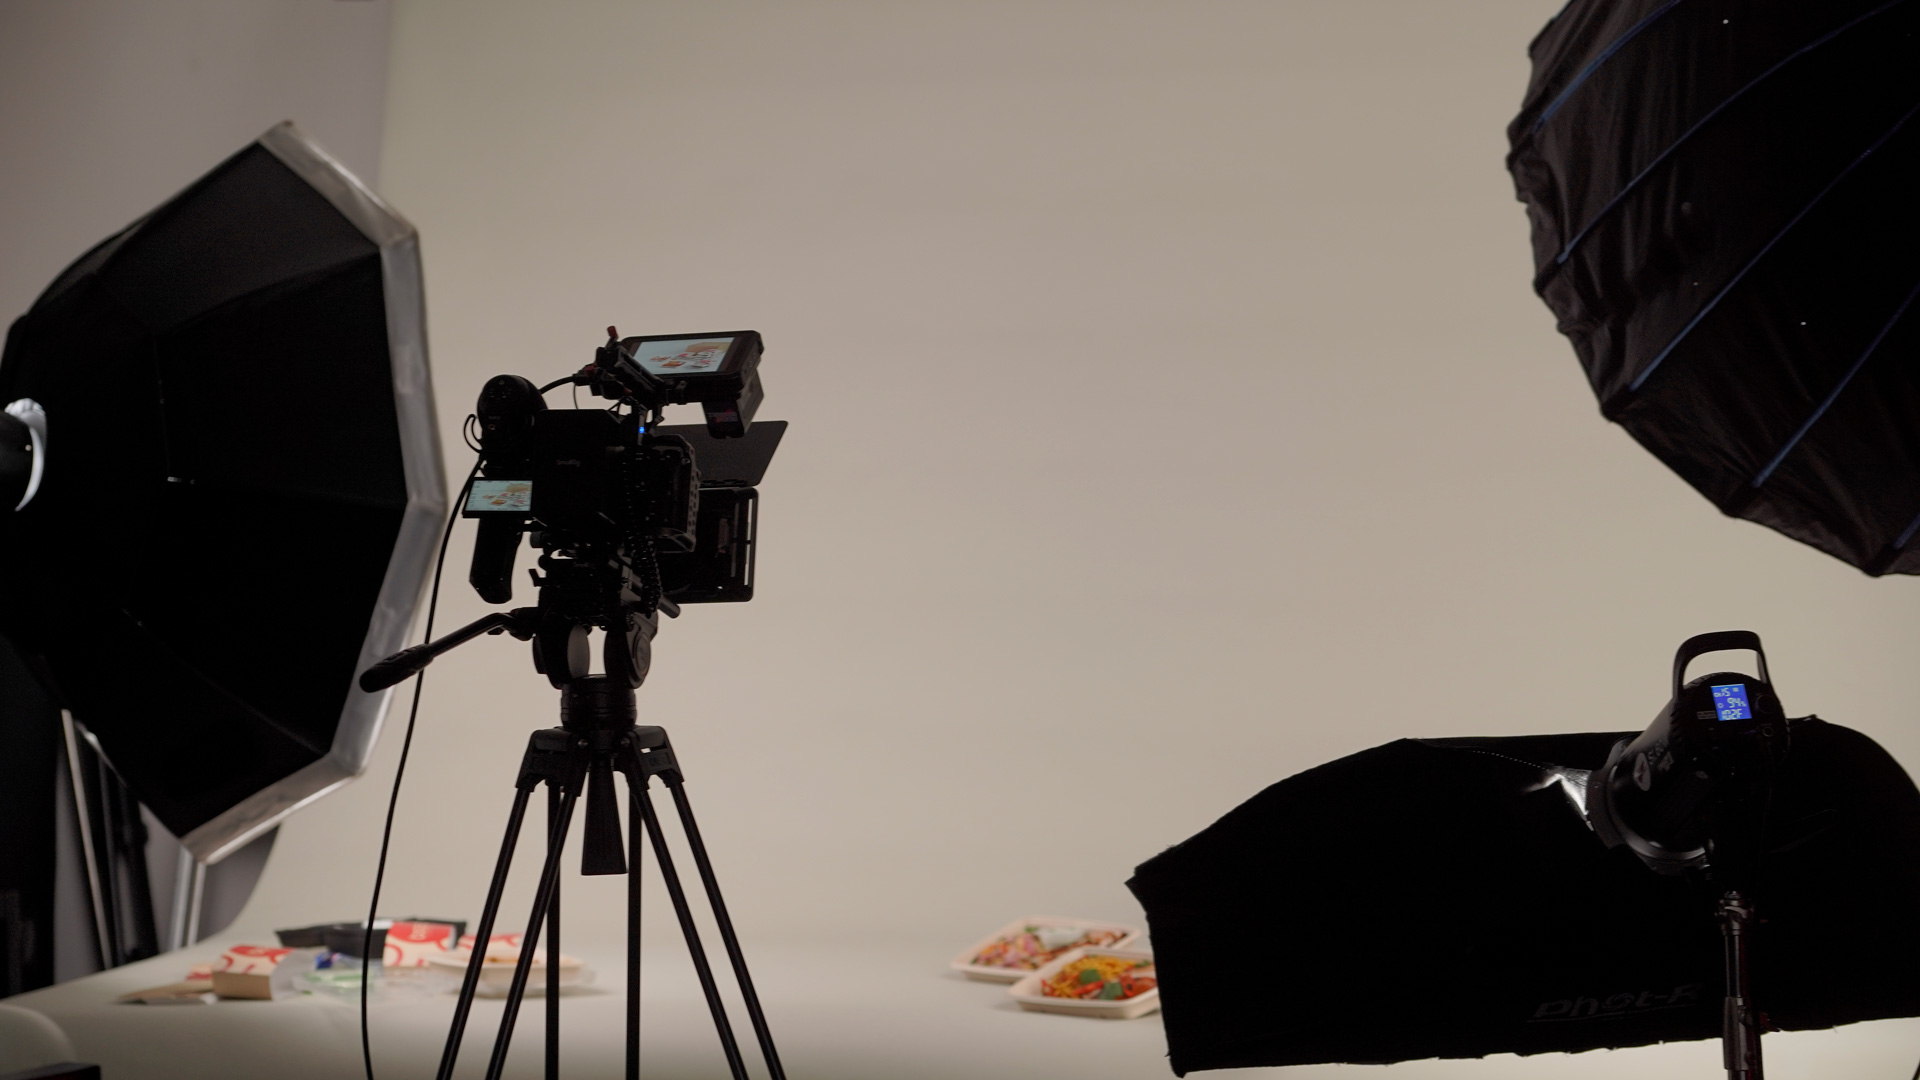 Video Agency: Image of studio setup, camera rig and lighting facing towards a beige backdrop with meal prep products on the backdrop.